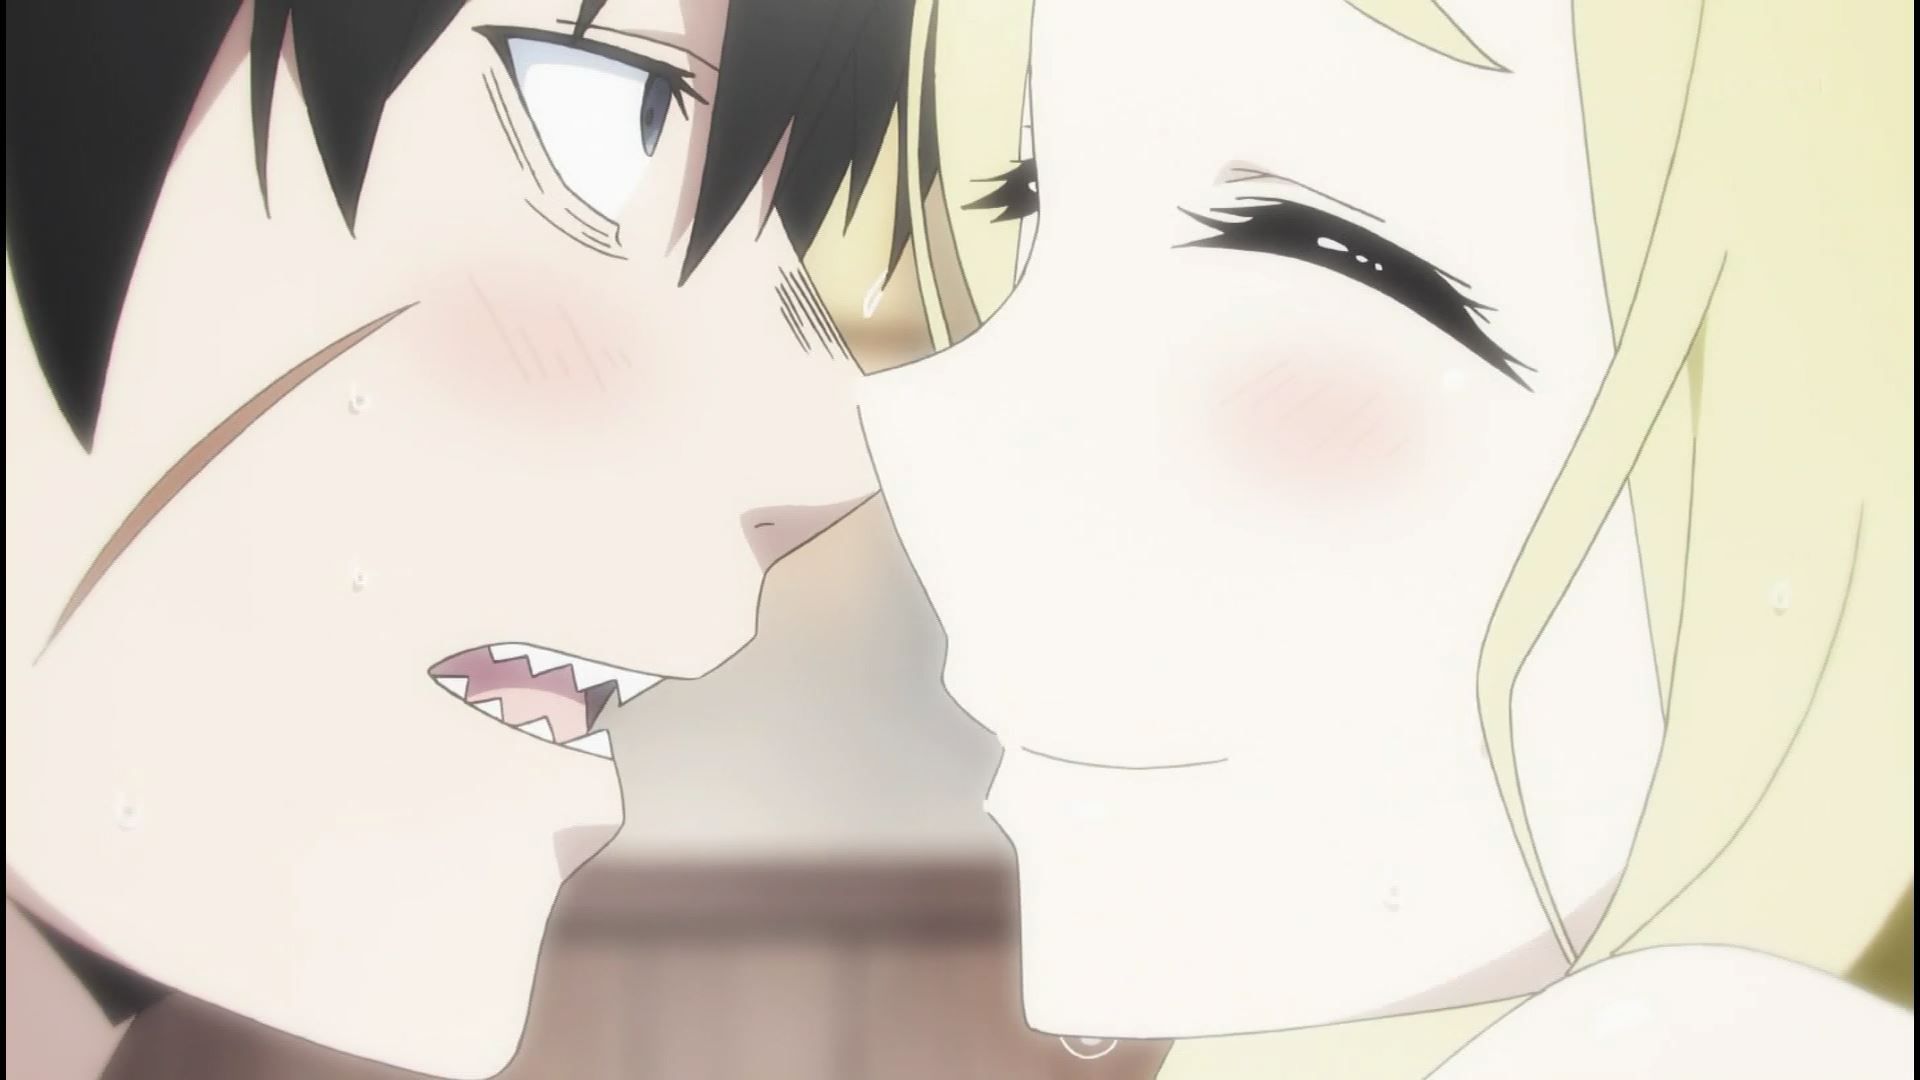 Anime [War x Love (Vallav)] In 11 episodes and become naked with girls and deep kiss or erotic scene! 13